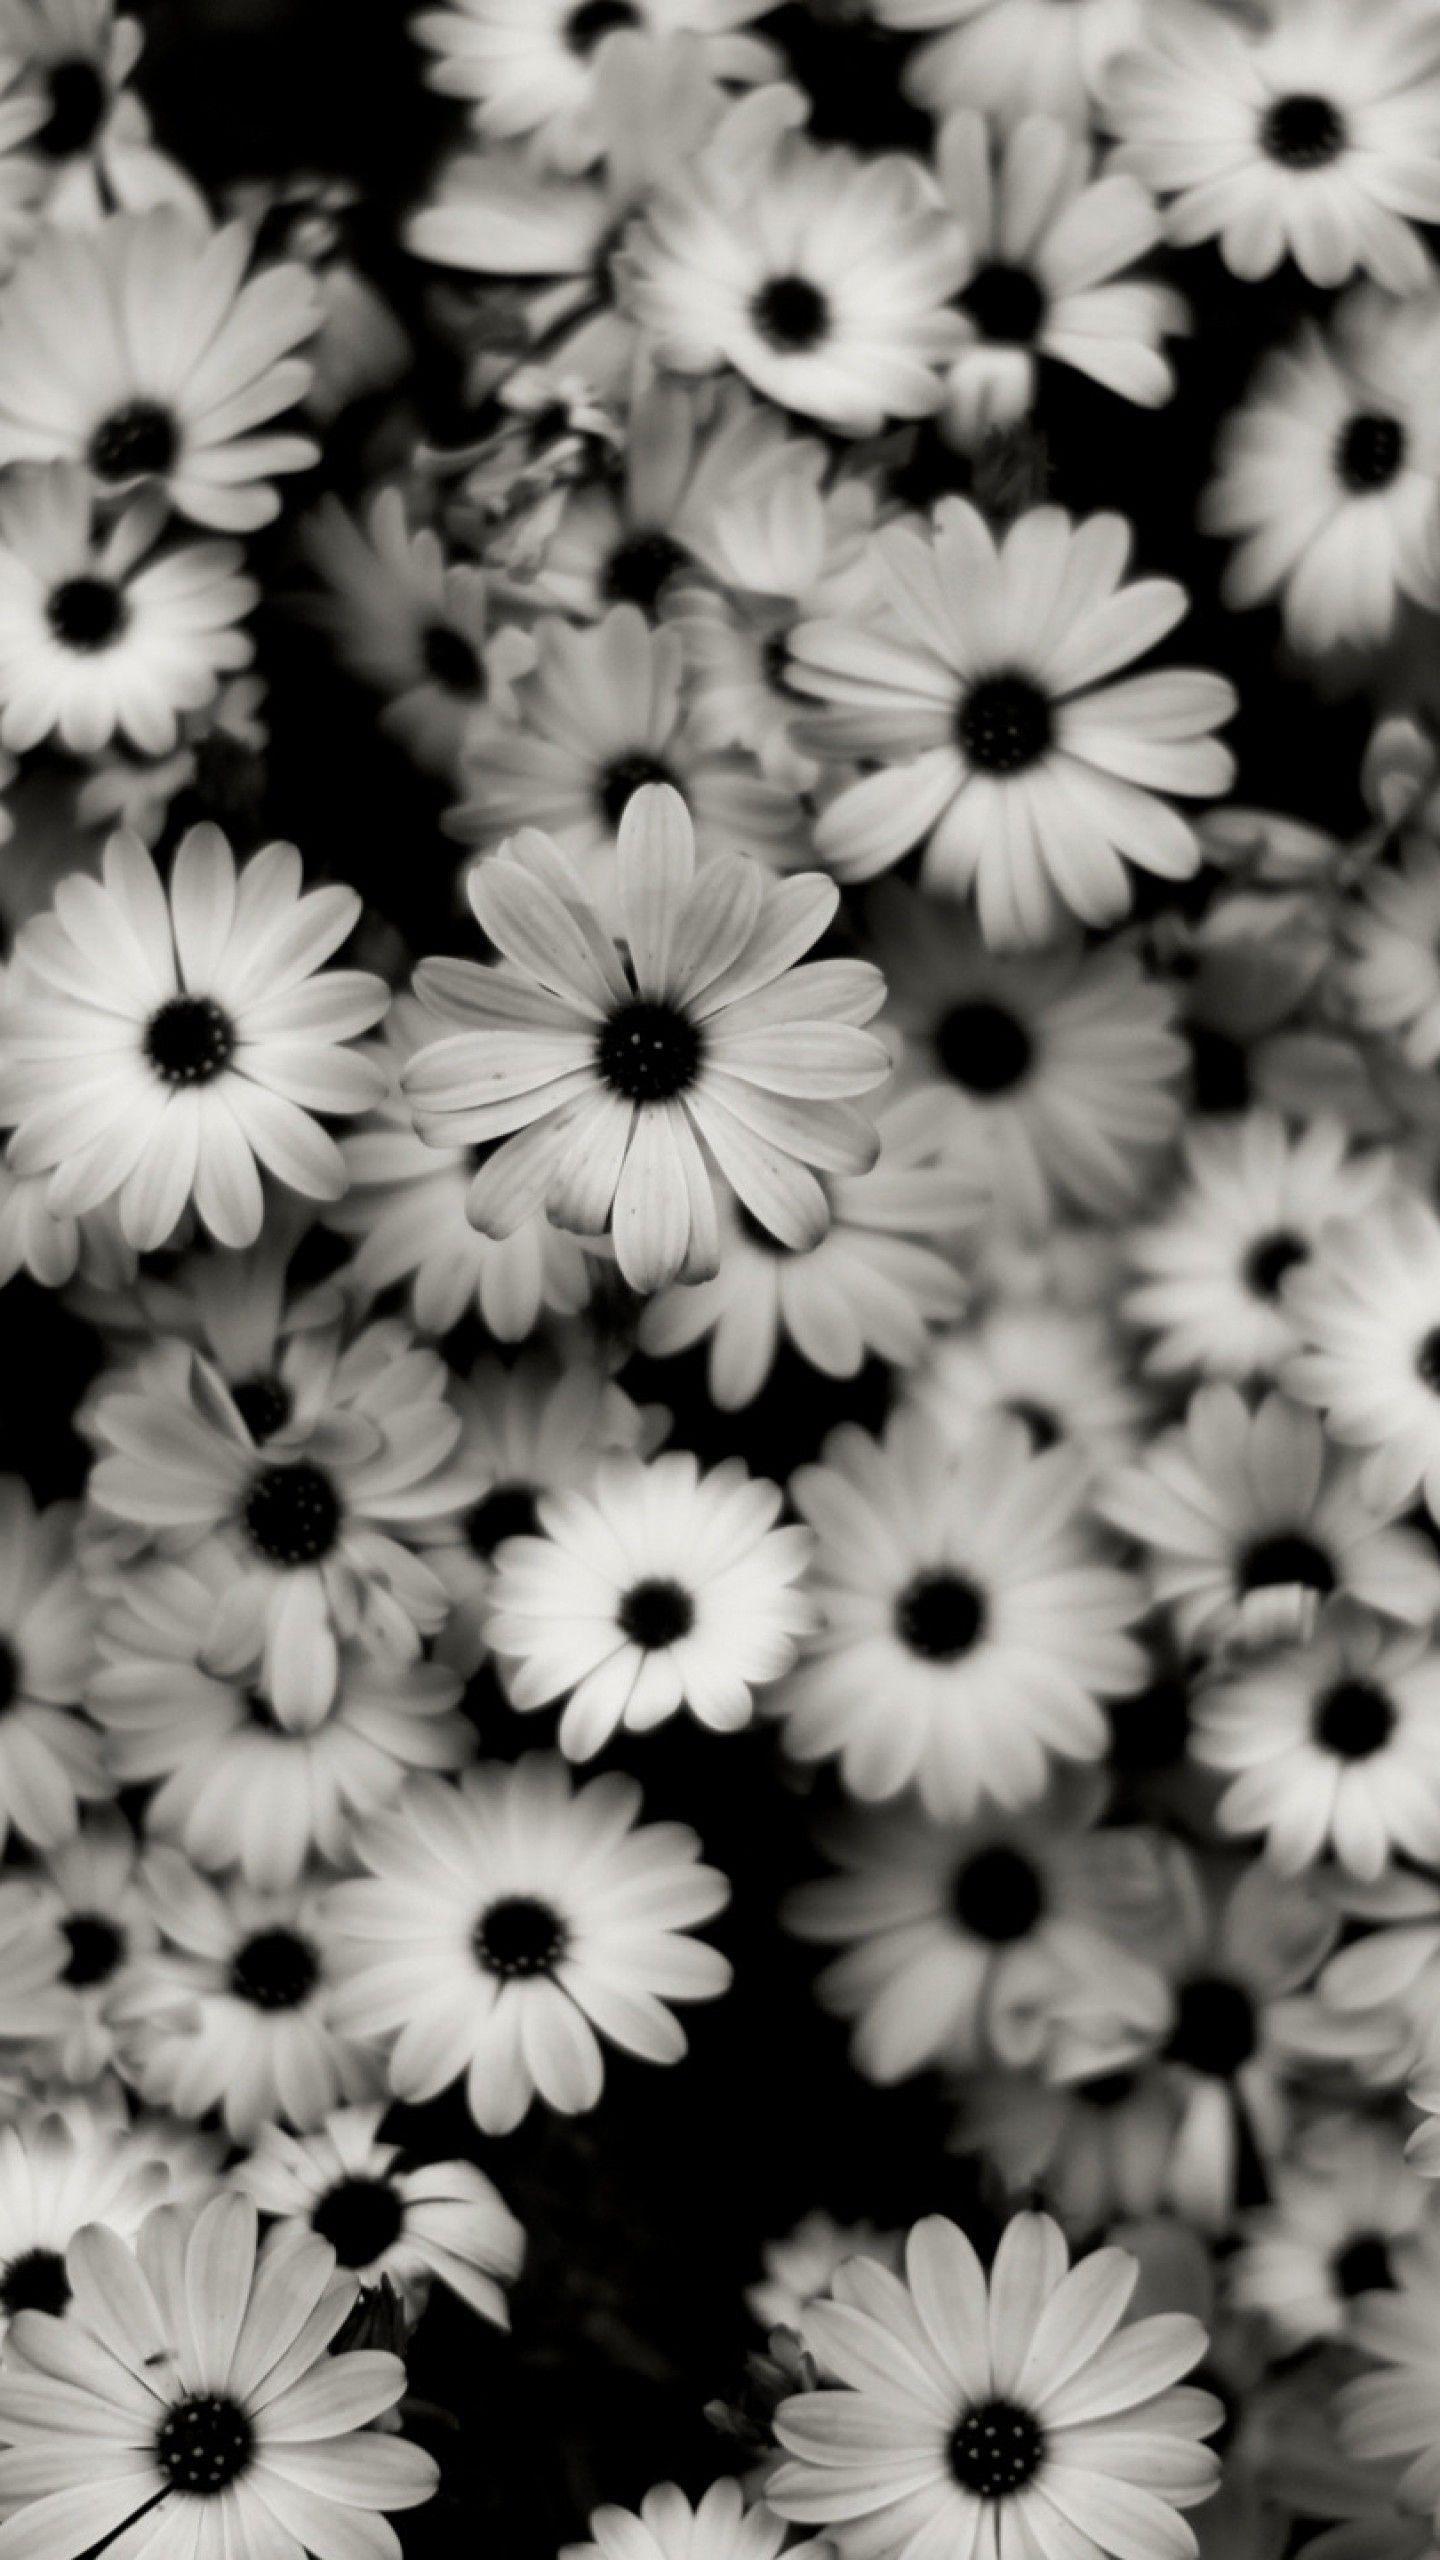 Black And White Daisy Wallpapers Top Free Black And White Daisy Backgrounds Wallpaperaccess